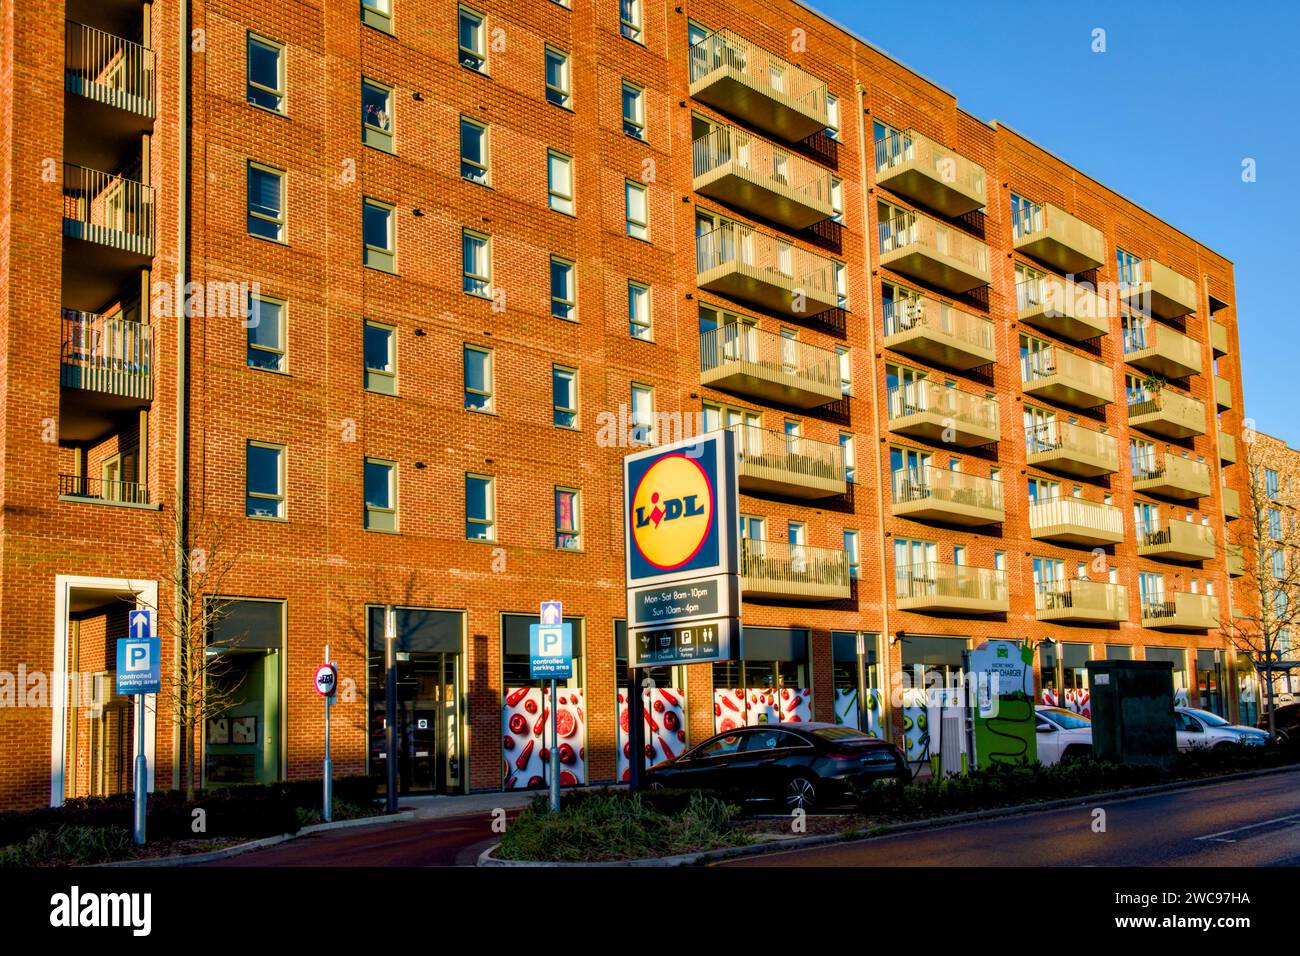 South Oxhey Central Housing Development sul sito di The Old Shops, South Oxhey, Hertfordshire, Inghilterra, Regno Unito Foto Stock